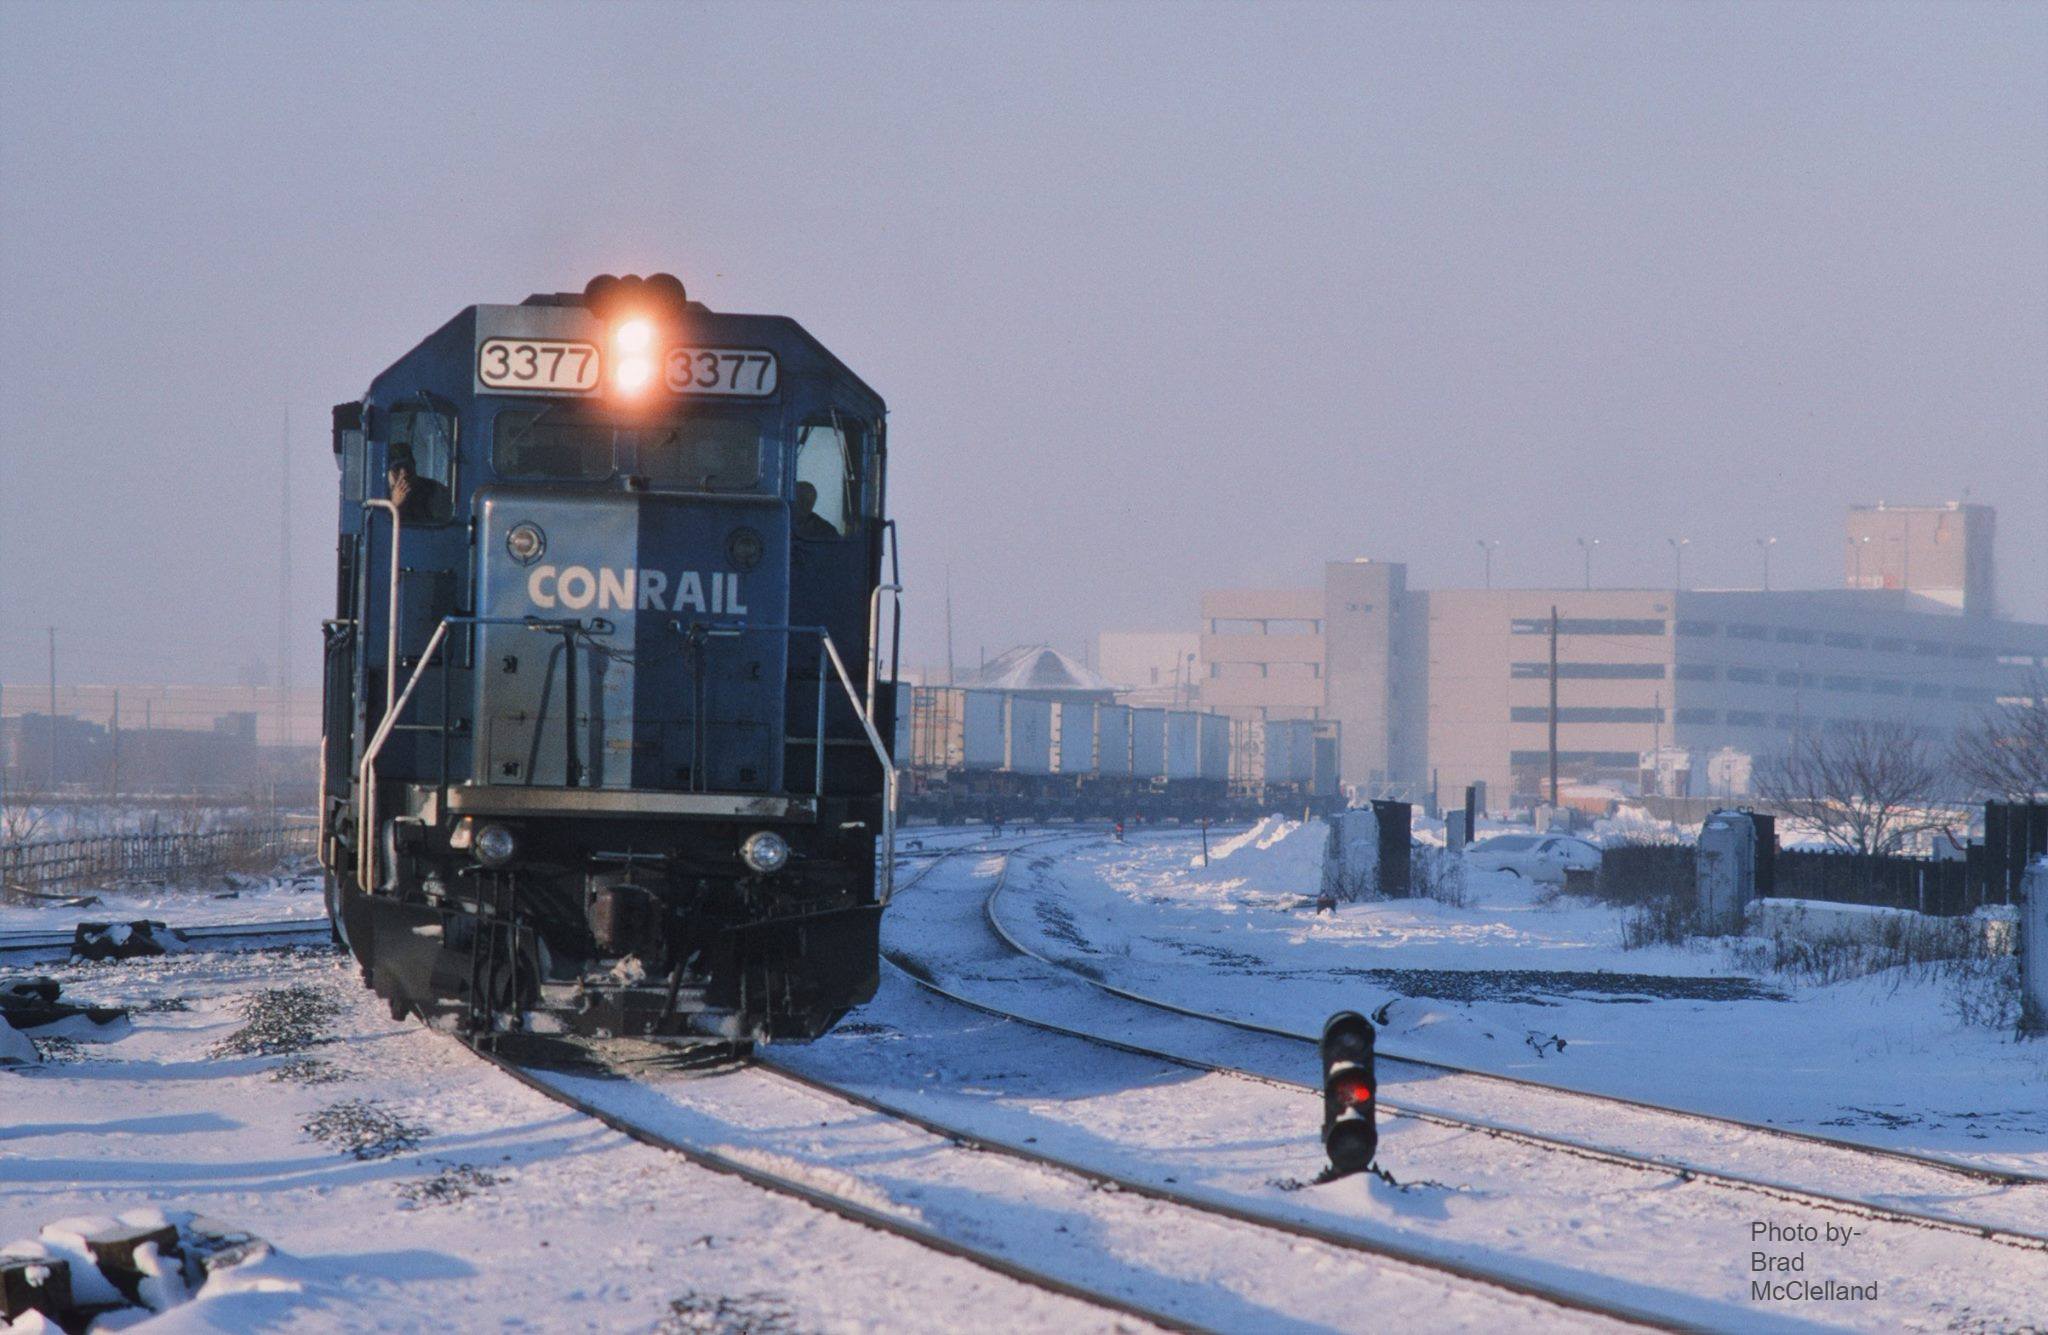 A train runs down snow-covered tracks. The city is in the background.